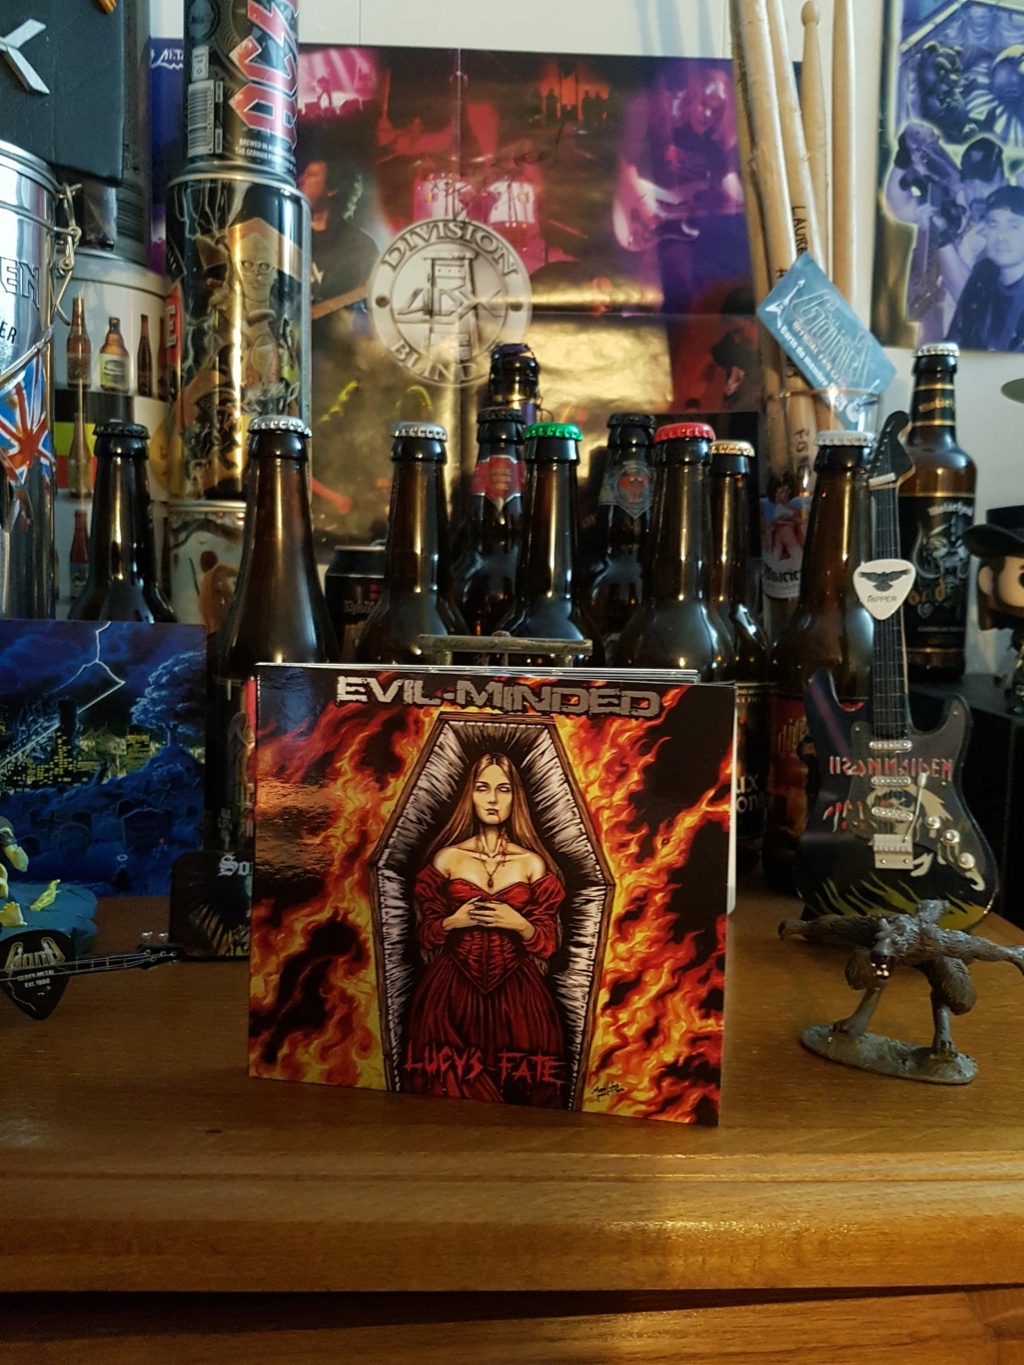 Evil Minted  "Lucy's Fate" heavy metal 2022 32927410